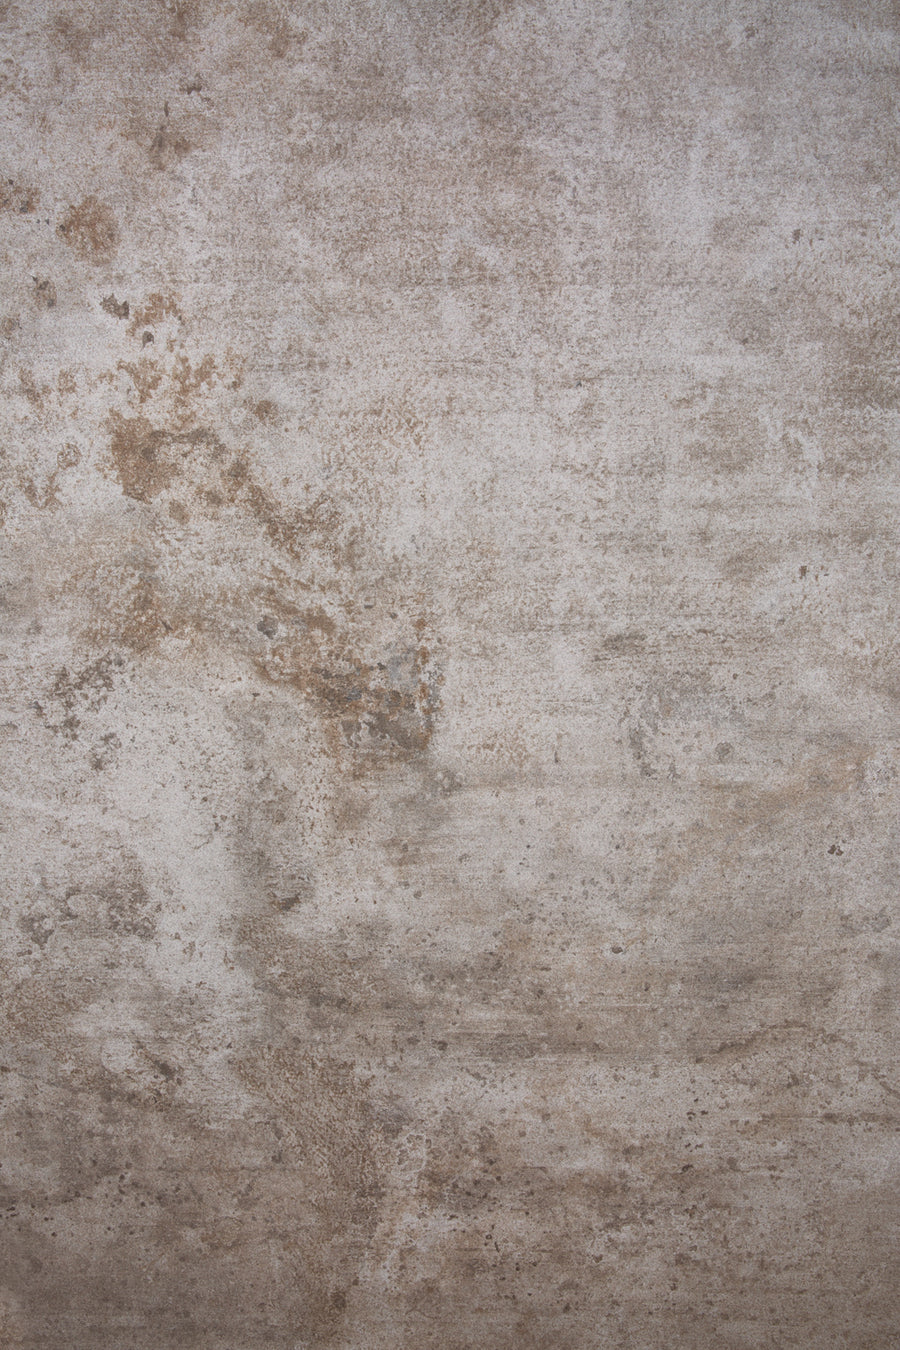 Rustic, warm-toned stone photography surface